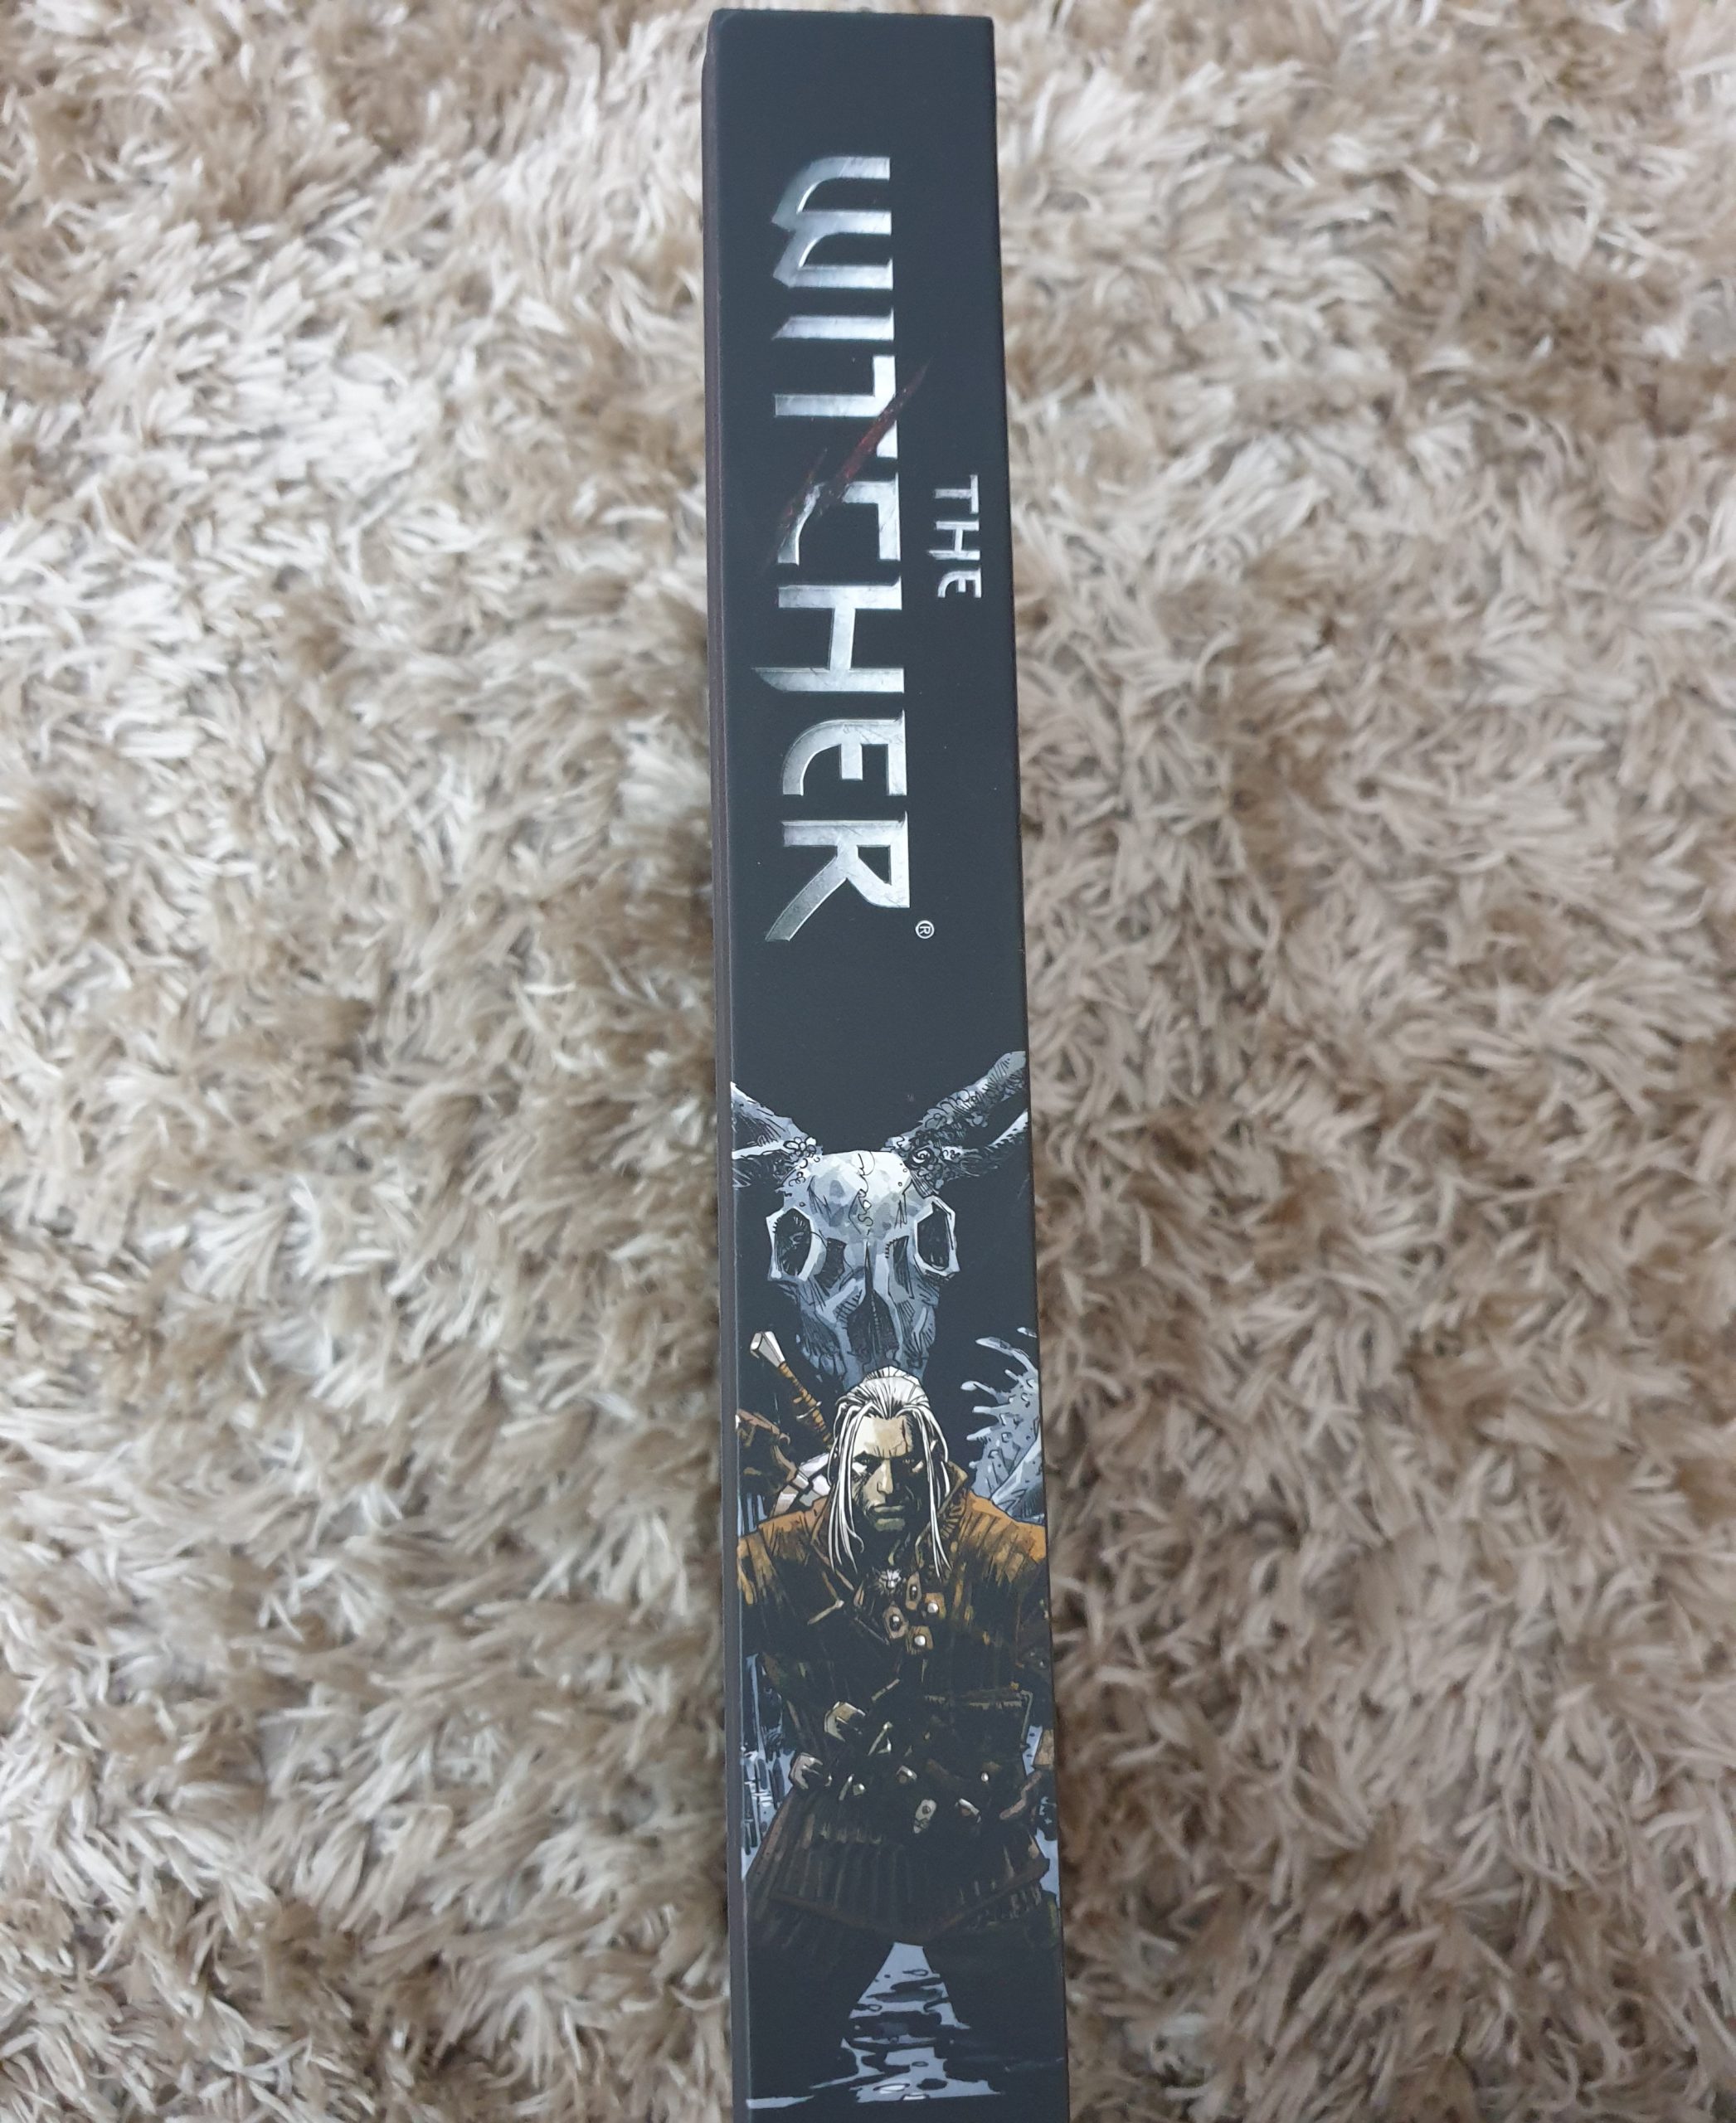 The Witcher Comics (1-5) Library Edition (Hardcover)